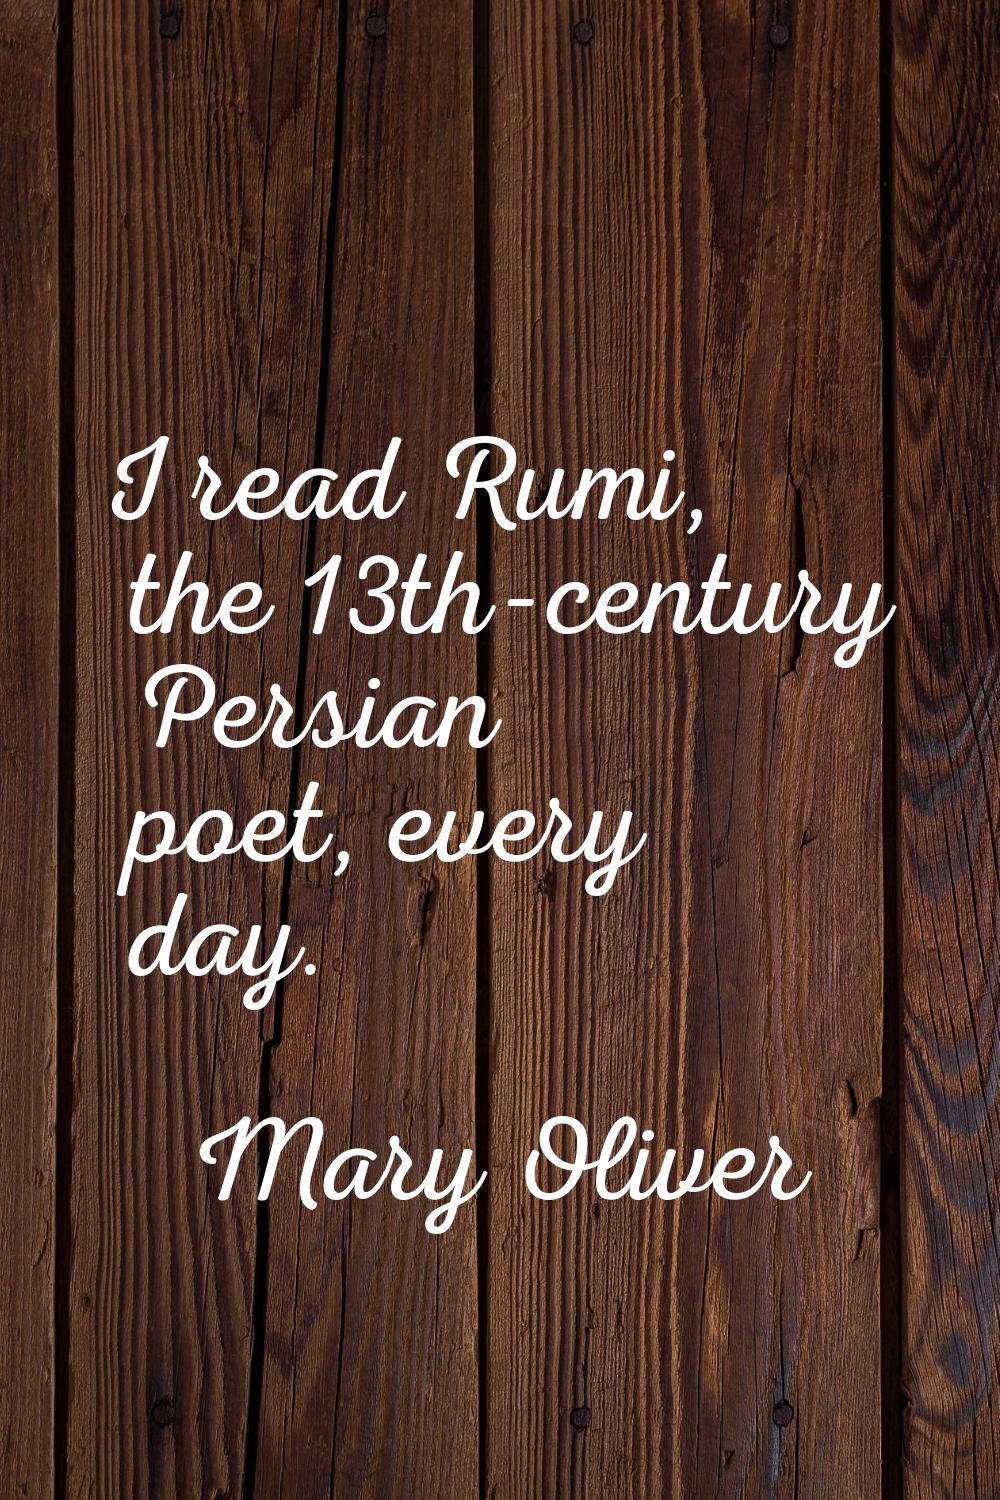 I read Rumi, the 13th-century Persian poet, every day.